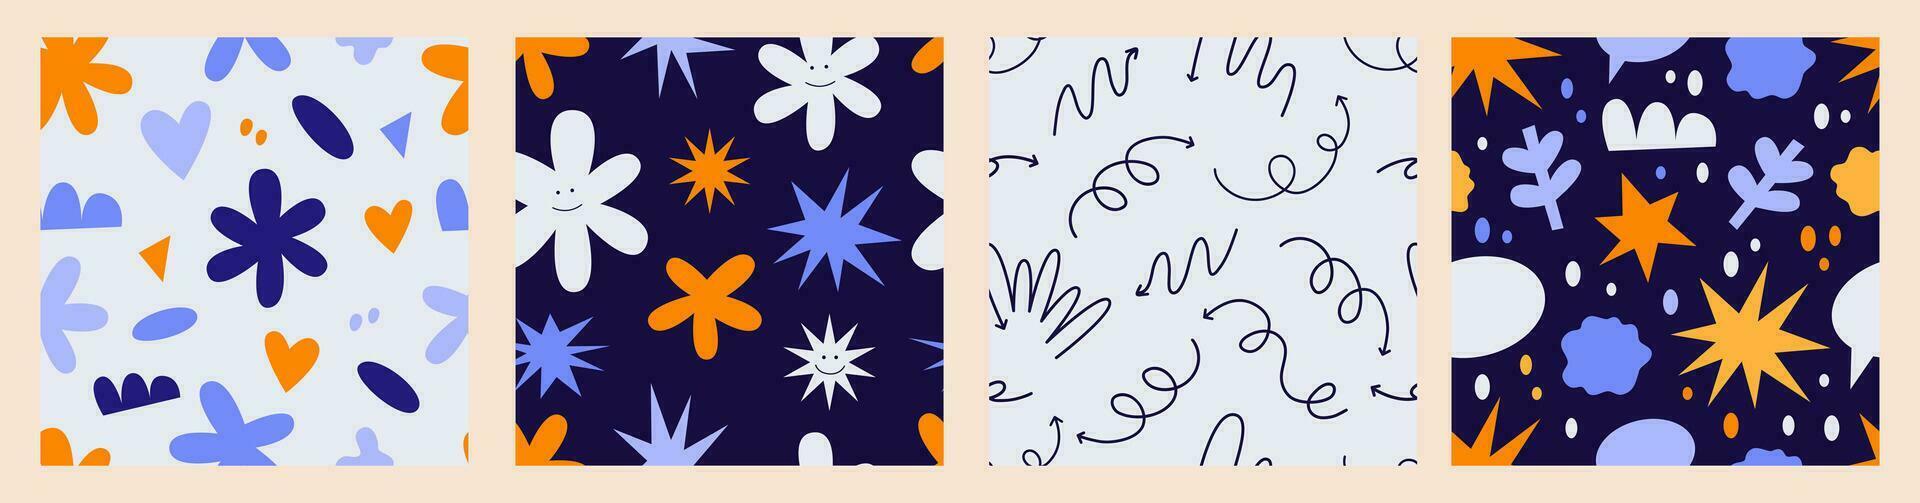 Collection of seamless patterns with playful abstract shapes, arrows, squiggles. Vector illustration.